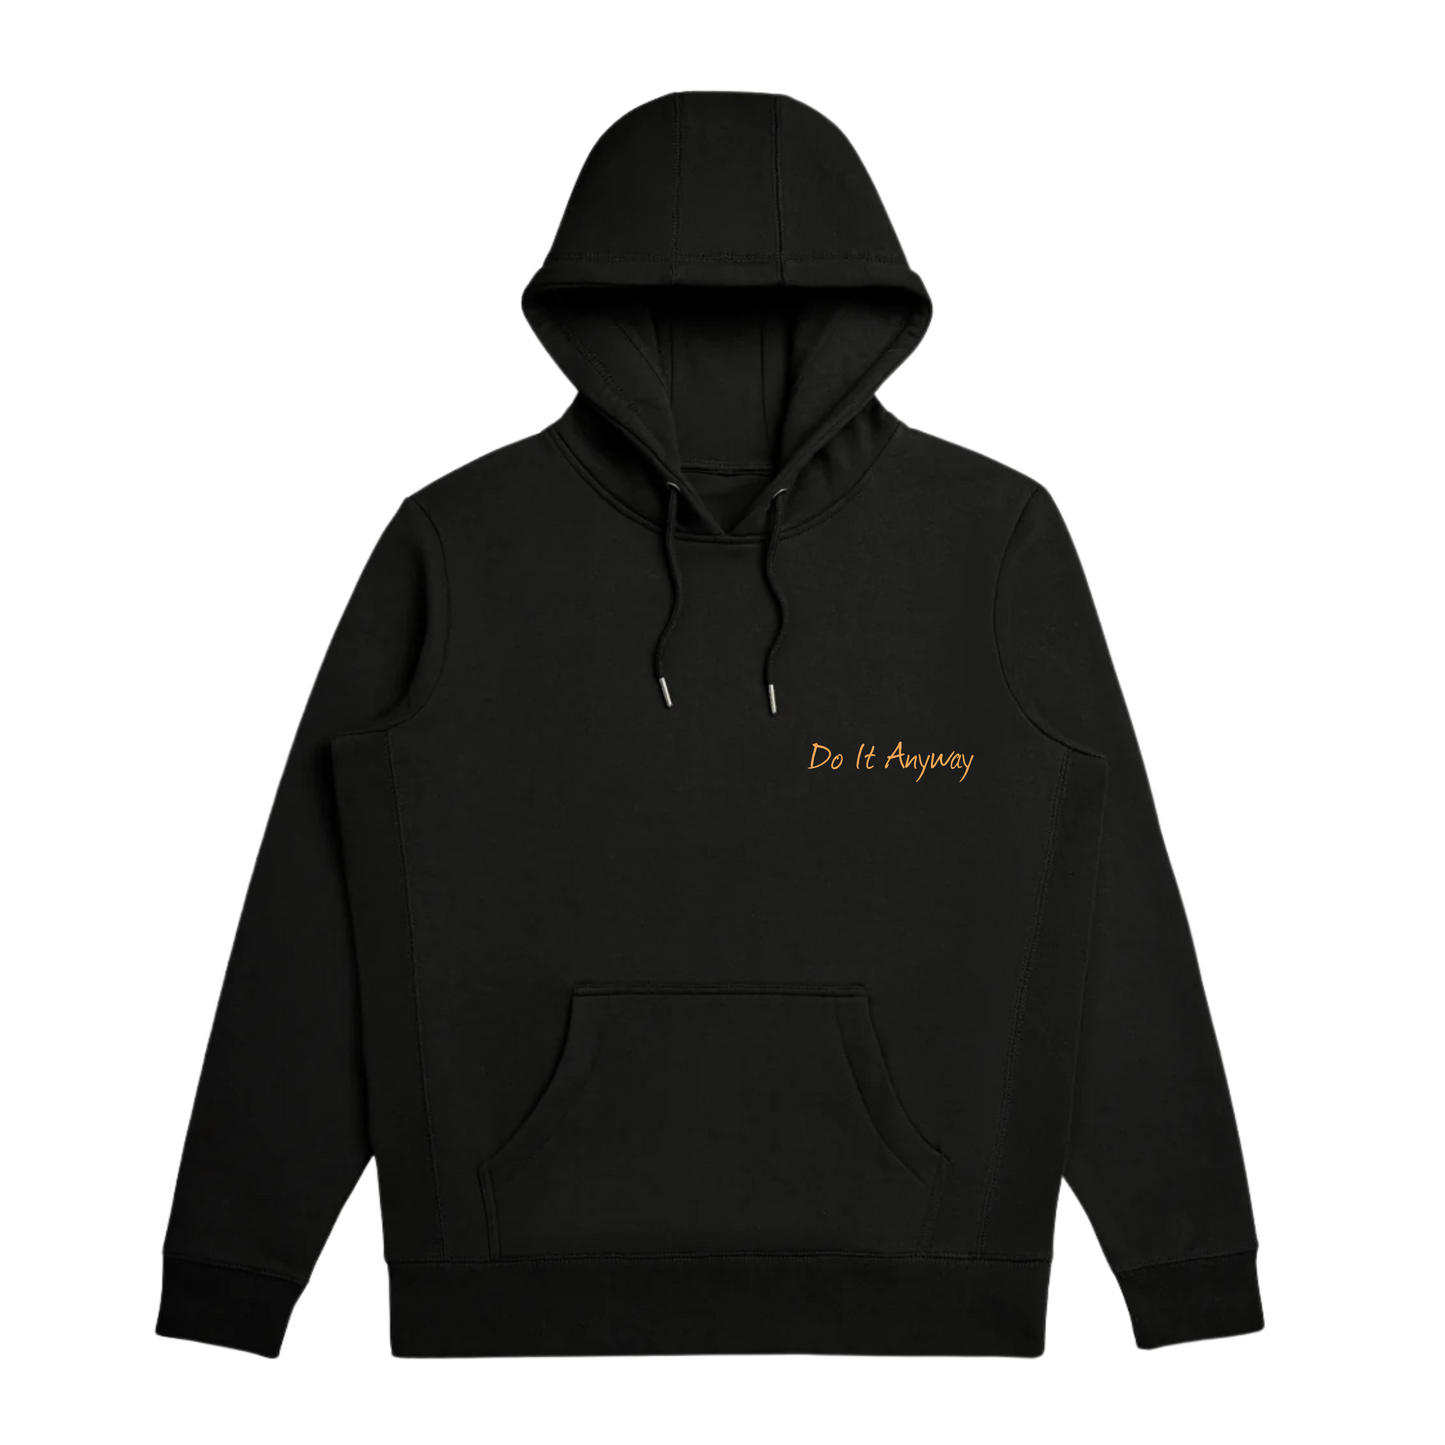 Do It Anyway Black Graphic Hoodie + Jogger Bundle